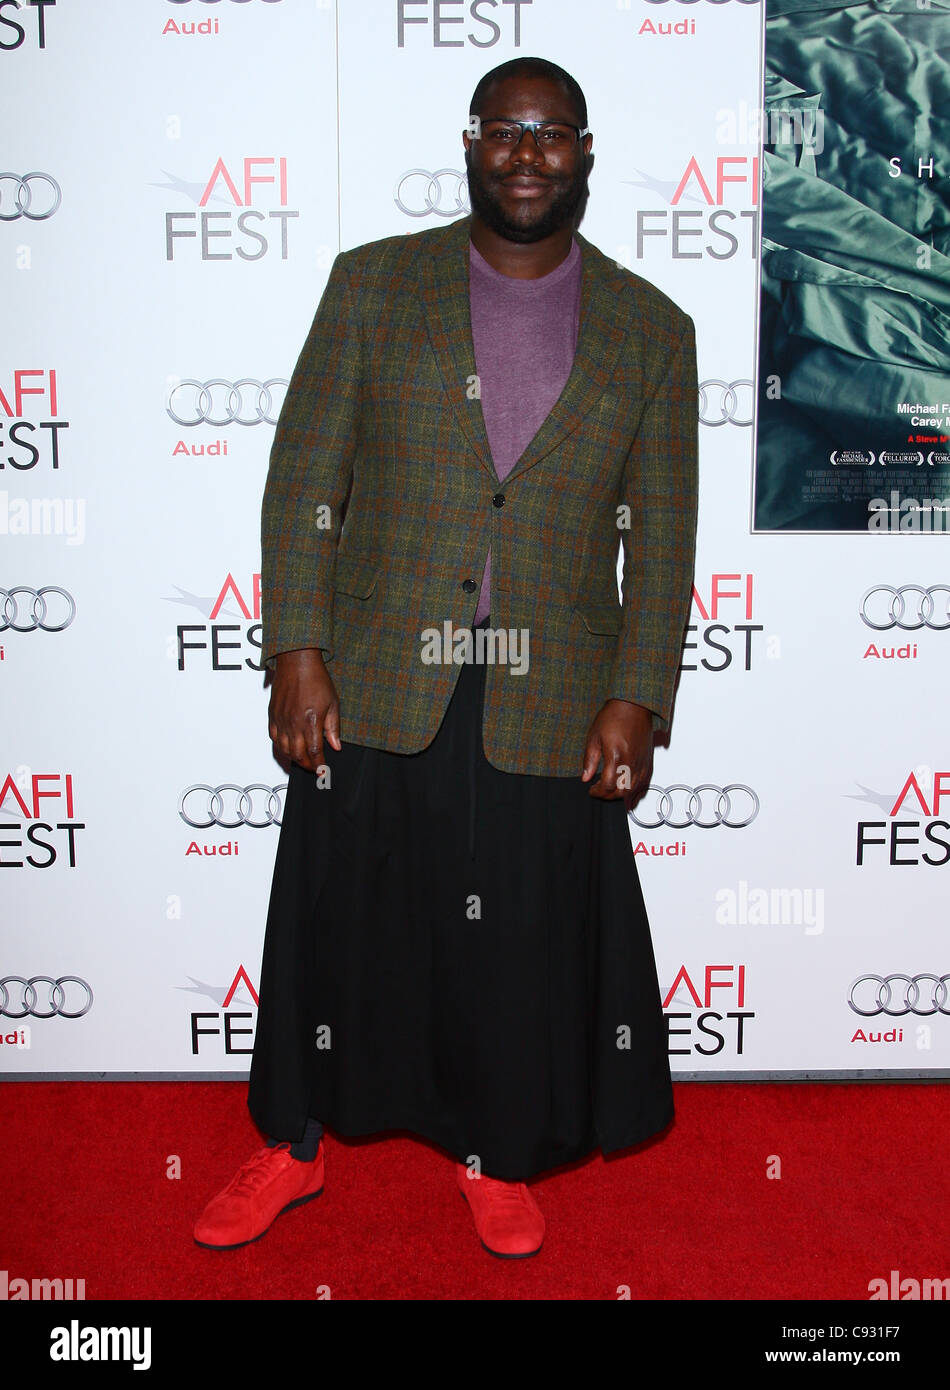 STEVE MCQUEEN SHAME. GALA PREMIERE AT THE AFI FEST 2011 HOLLYWOOD LOS ANGELES CALIFORNIA USA 09 November 2011 Stock Photo